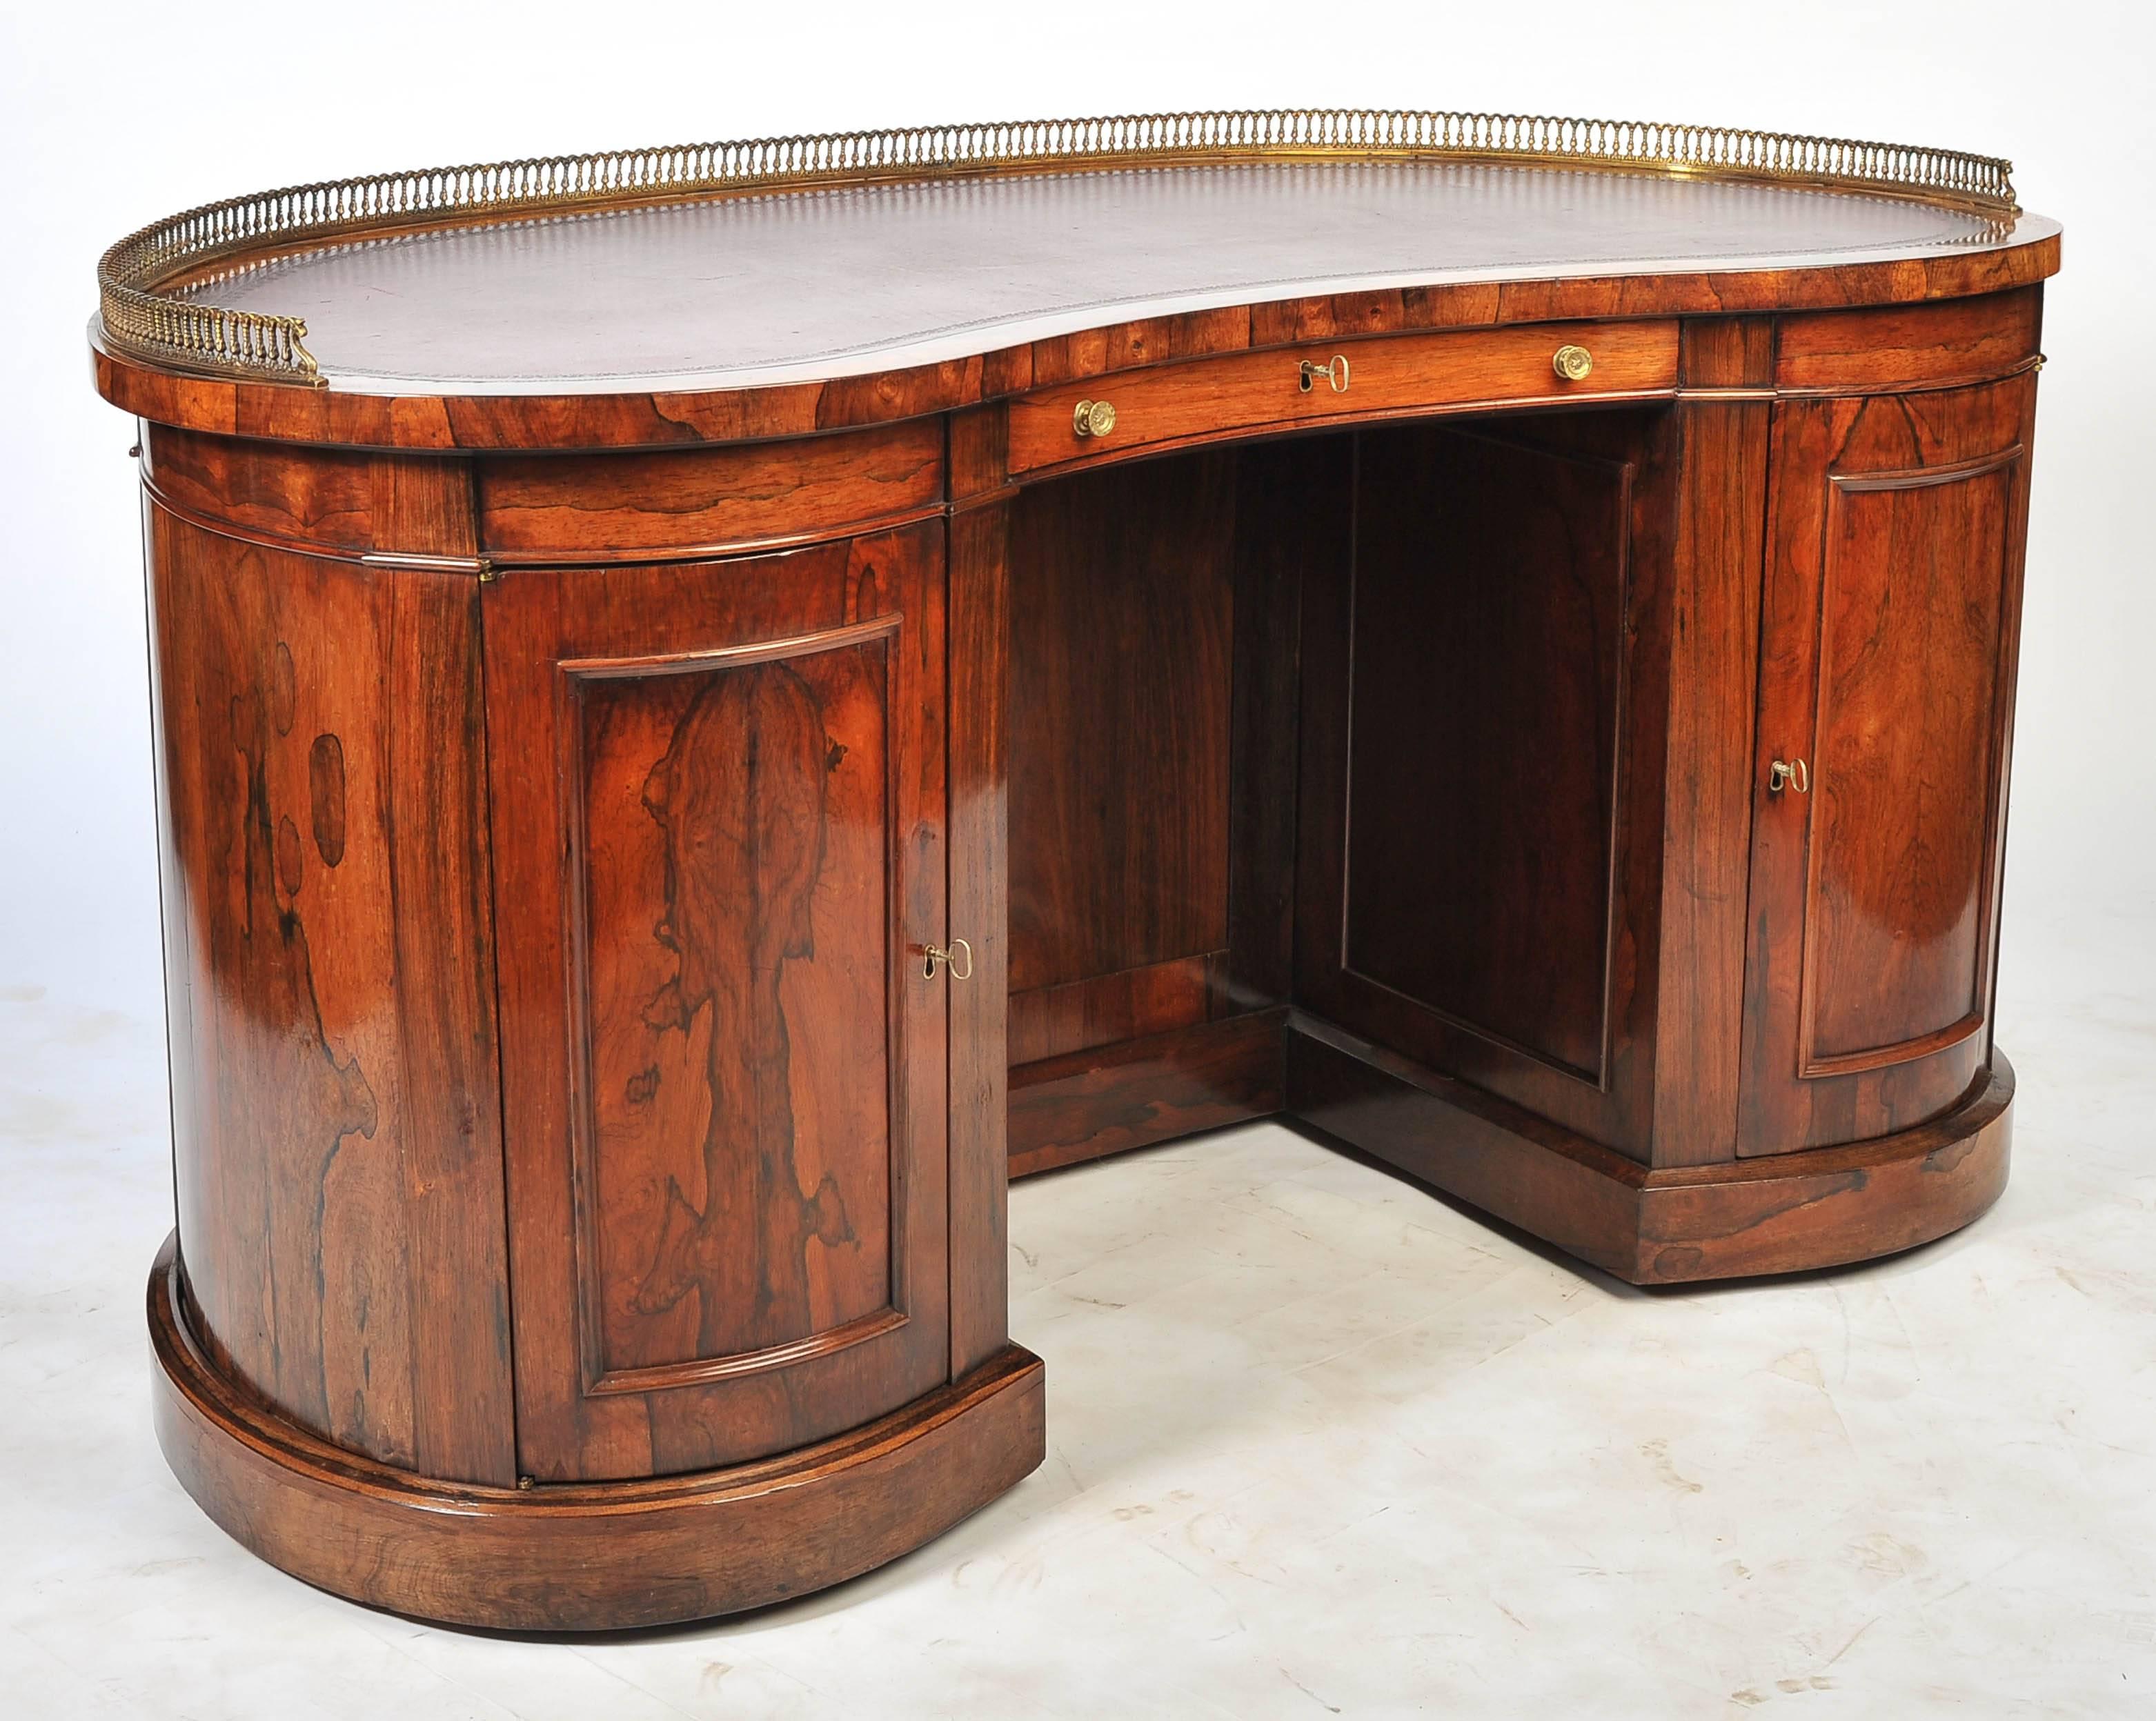 A good quality late Regency period rosewood kidney shape pedestal desk, having a three quarter brass gallery, an inset leather top. Three frieze drawers, the central one having a hinged leather reading slope, two cupboard doors opening to reveal